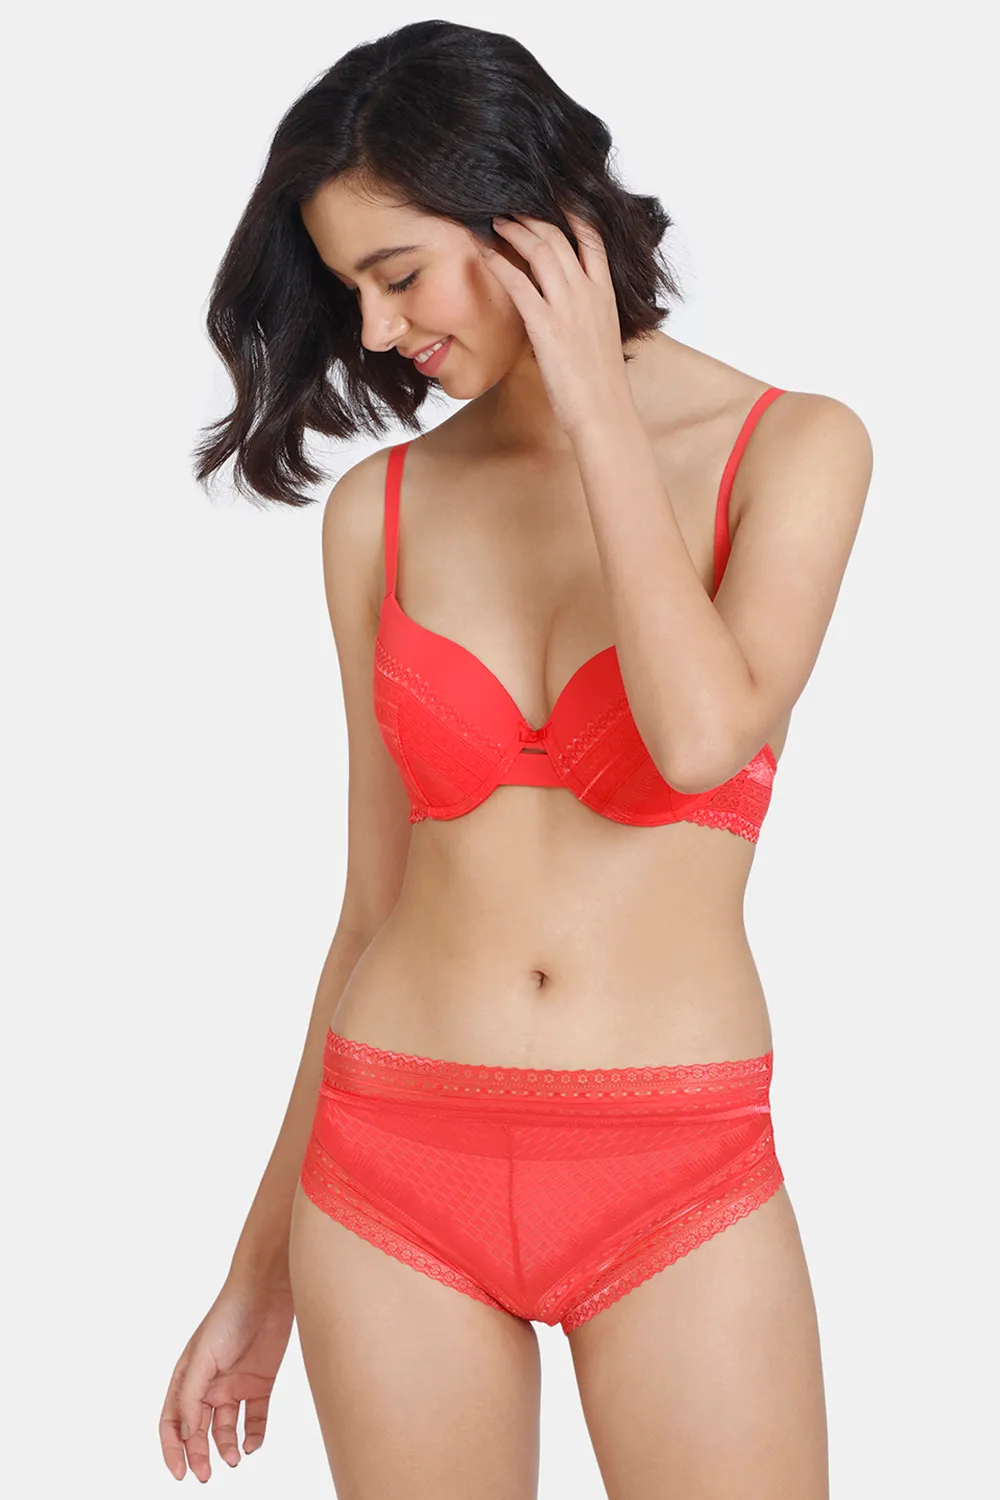 https://cdn.zivame.com/ik-seo/media/catalog/product/1/_/1_46_13/zivame-heartstopper-push-up-wired-3-4th-coverage-bra-with-hipster-panty-hibiscus.jpg